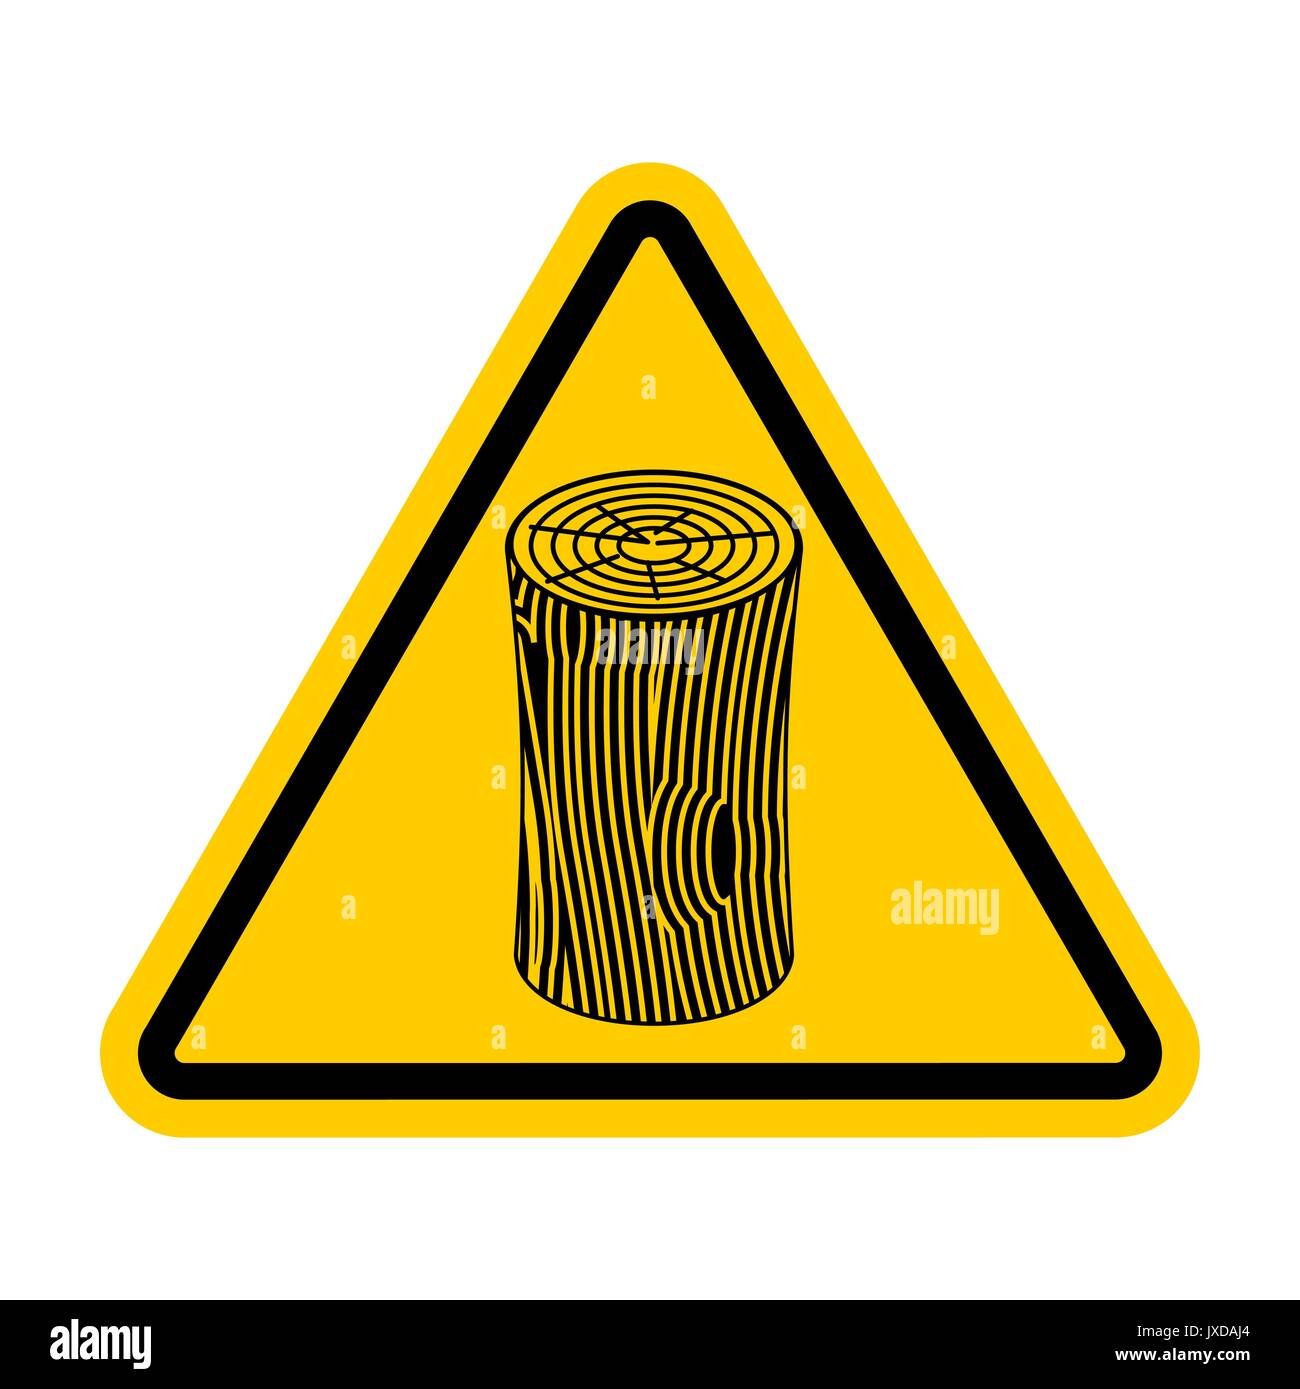 log Attention sign. Wooden billet Caution. Road yellow warning symbol Stock Vector